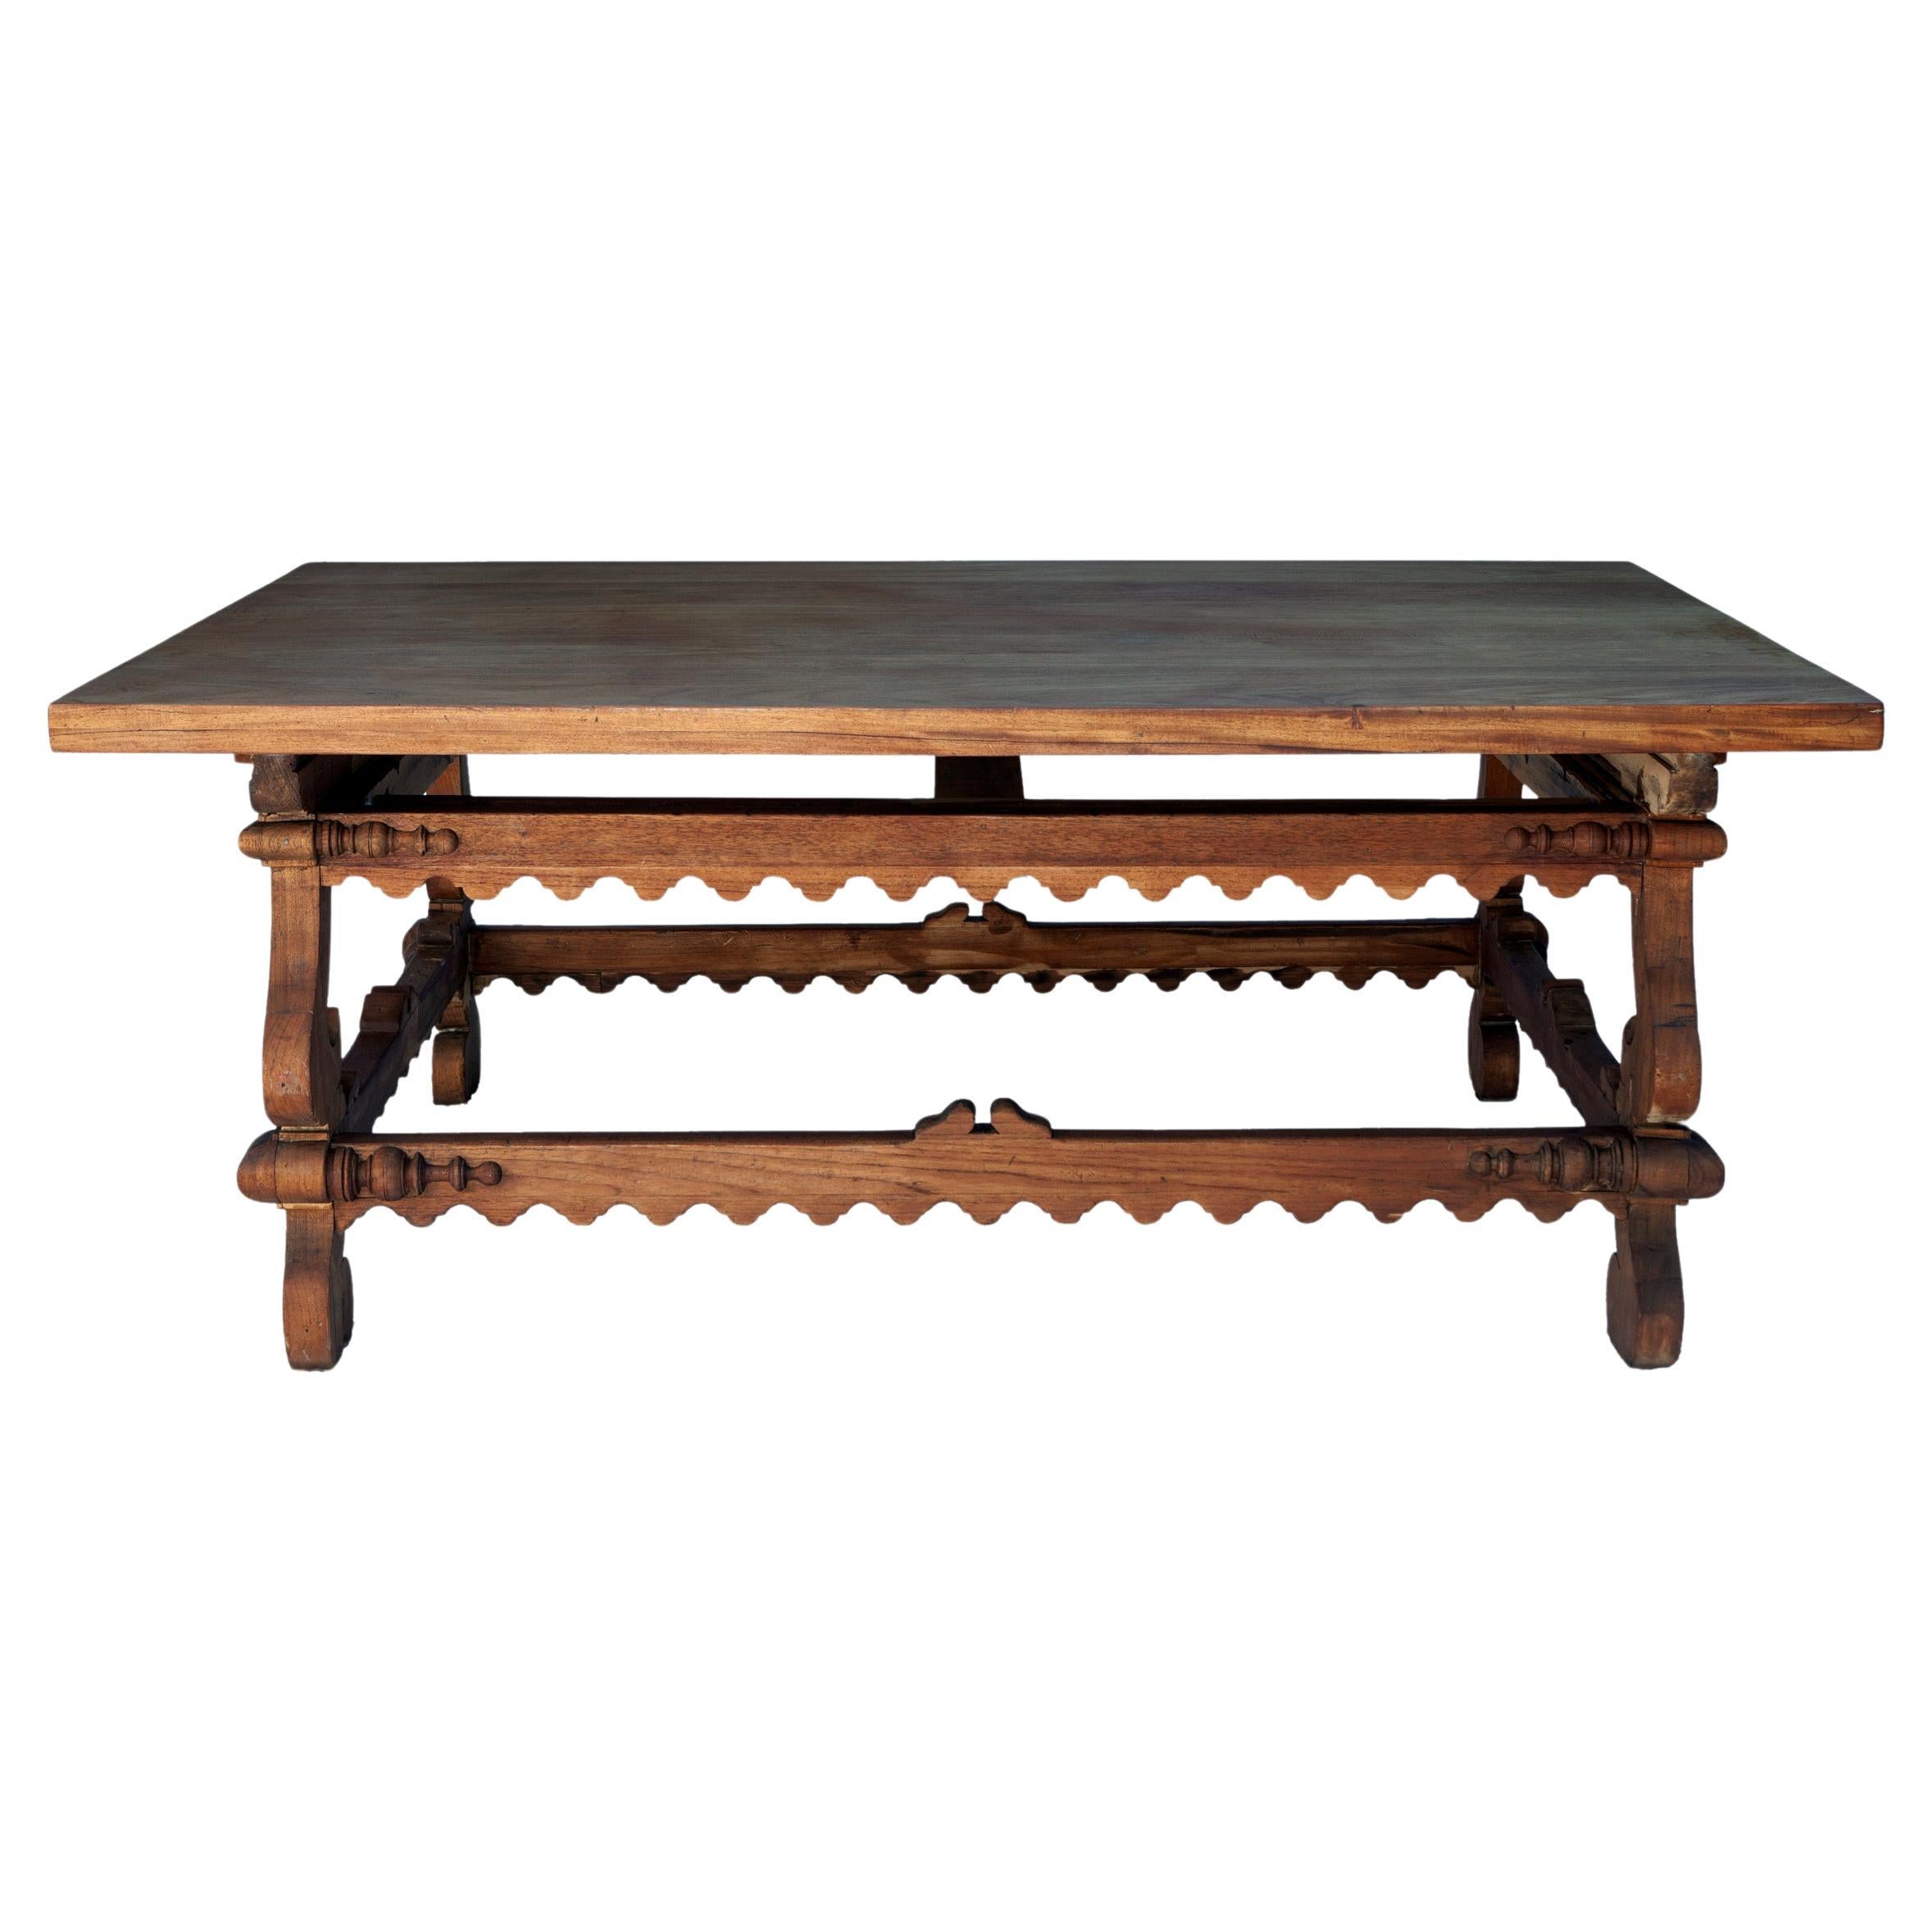 Stunning European rectangular centre table. The removable top sits on inverted legs joined by a box stretcher with a serrated edge. The base has decorative trim on each corner.